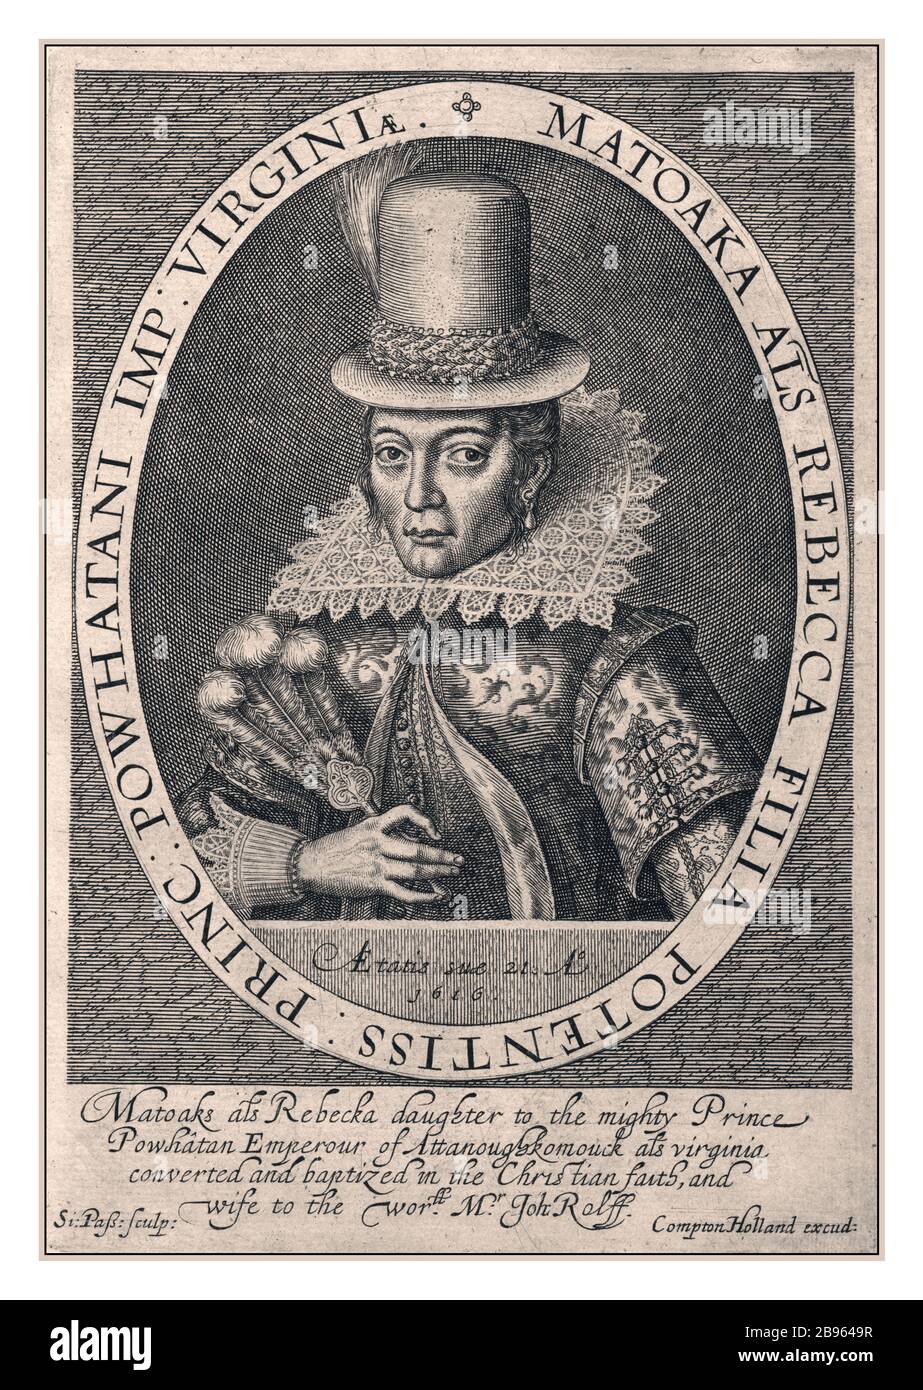 POCAHONTAS / MATOAKA American Indian princess aged 21 years just before her death 1617 Pocahontas, illustration in Bazilioologia A Booke of Kings, London, Compton Holland, 1618 Stock Photo